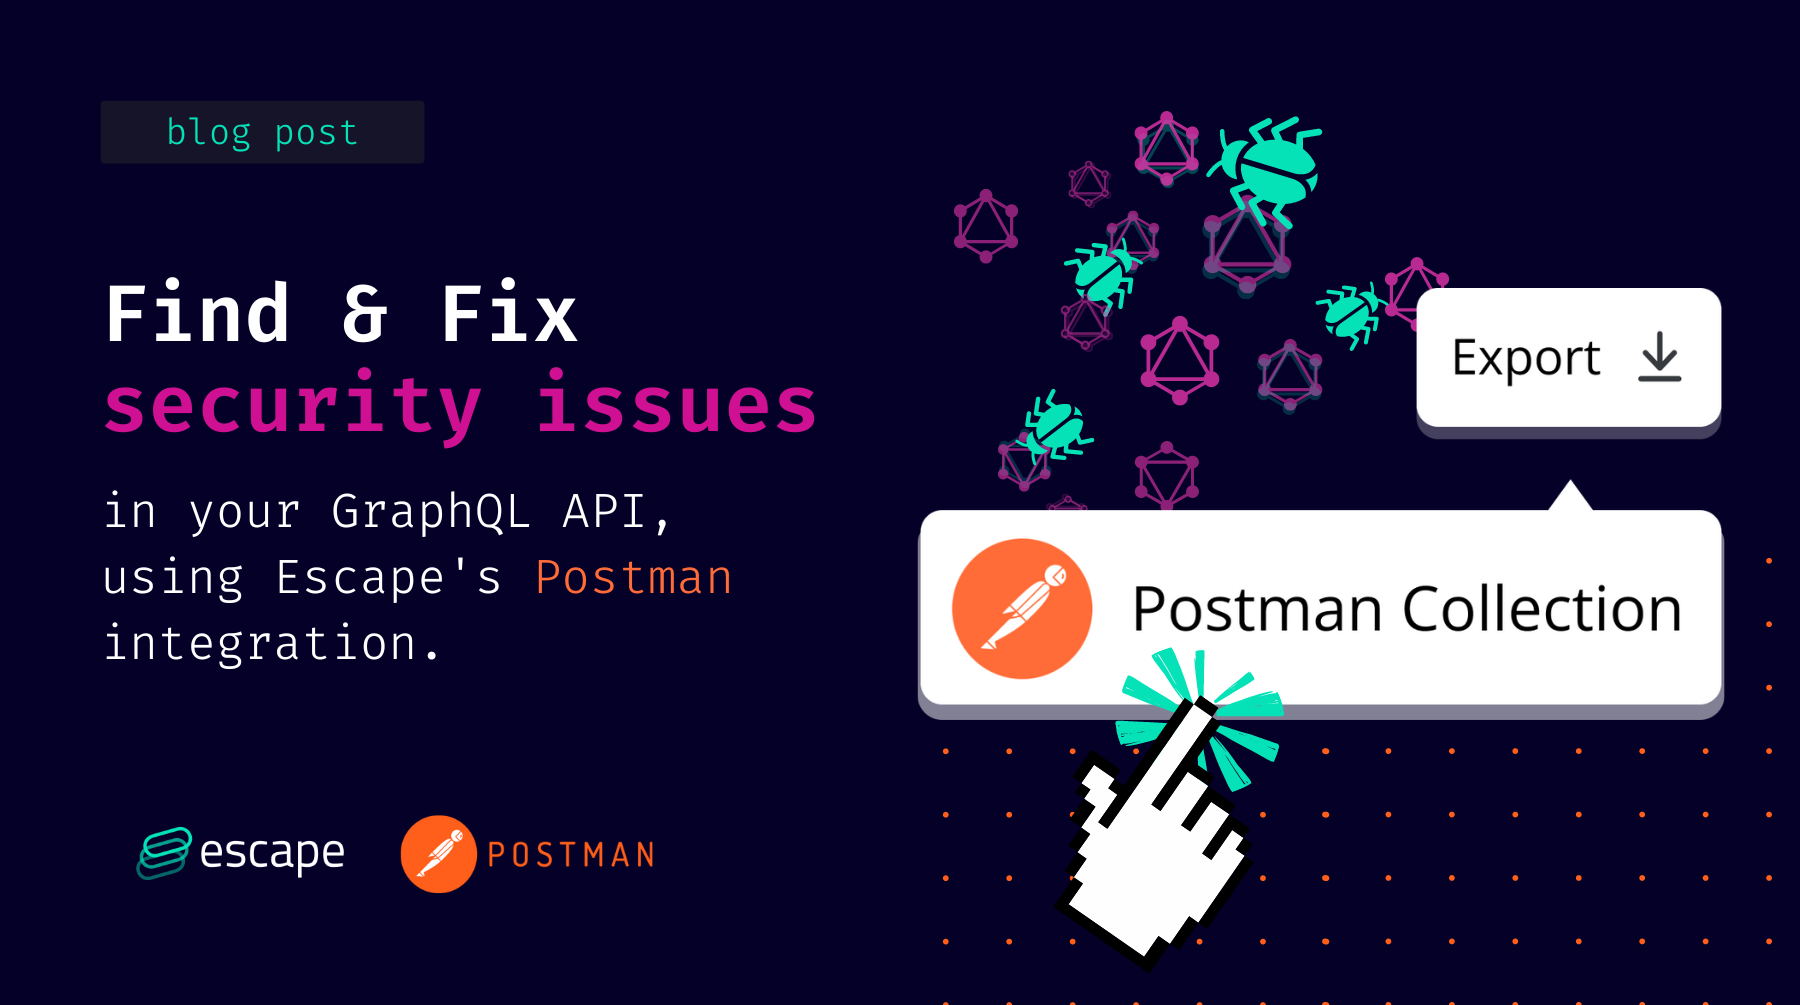 Find & fix security issues in your GraphQL API with Postman